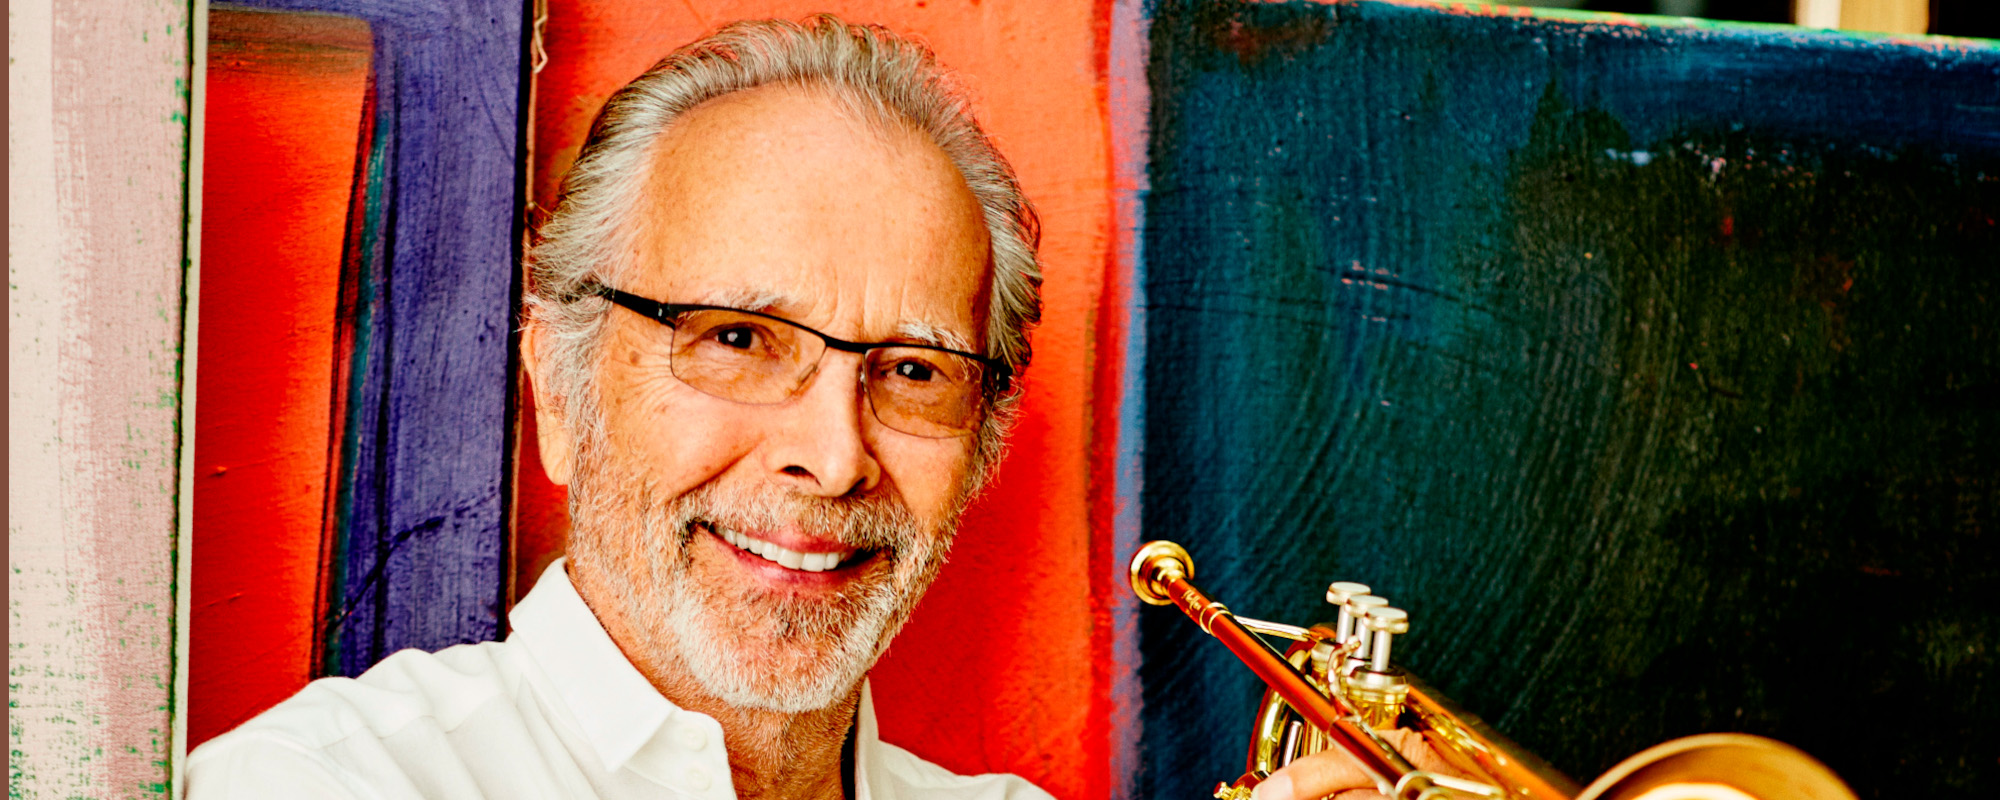 Herb Alpert Releases New Single “Here She Comes,” Shares Tour Dates